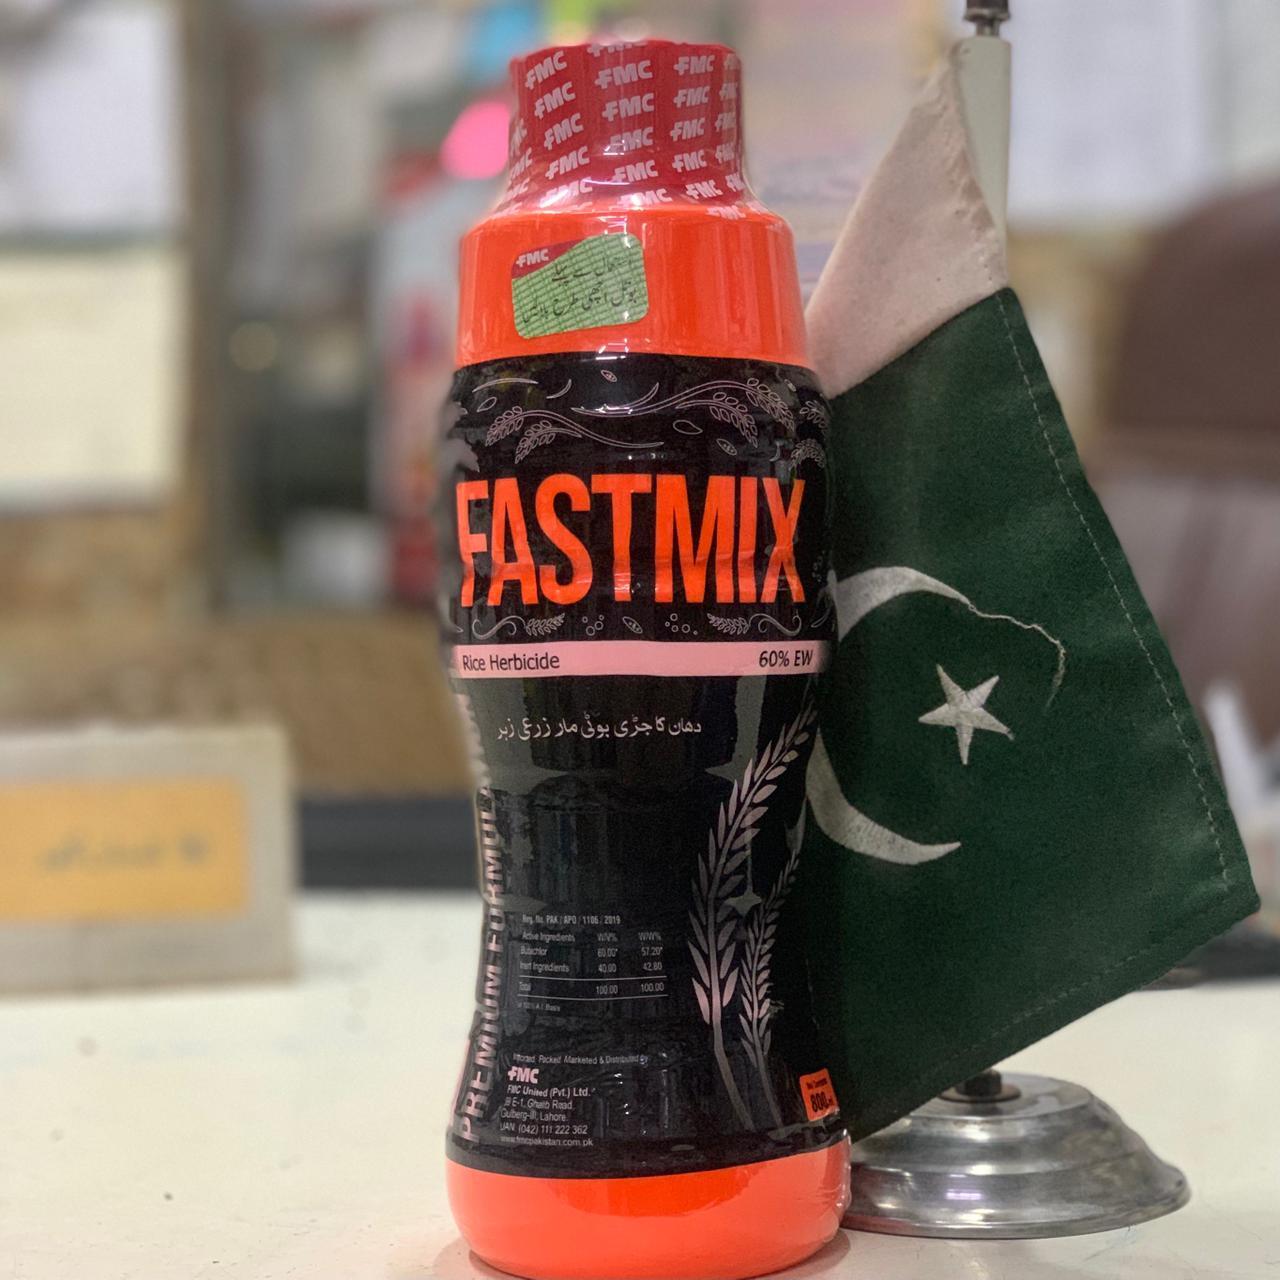  Fastmix 60ew Butachlor 60ec 800ml Fmc New Stock Available Now Fast Mix